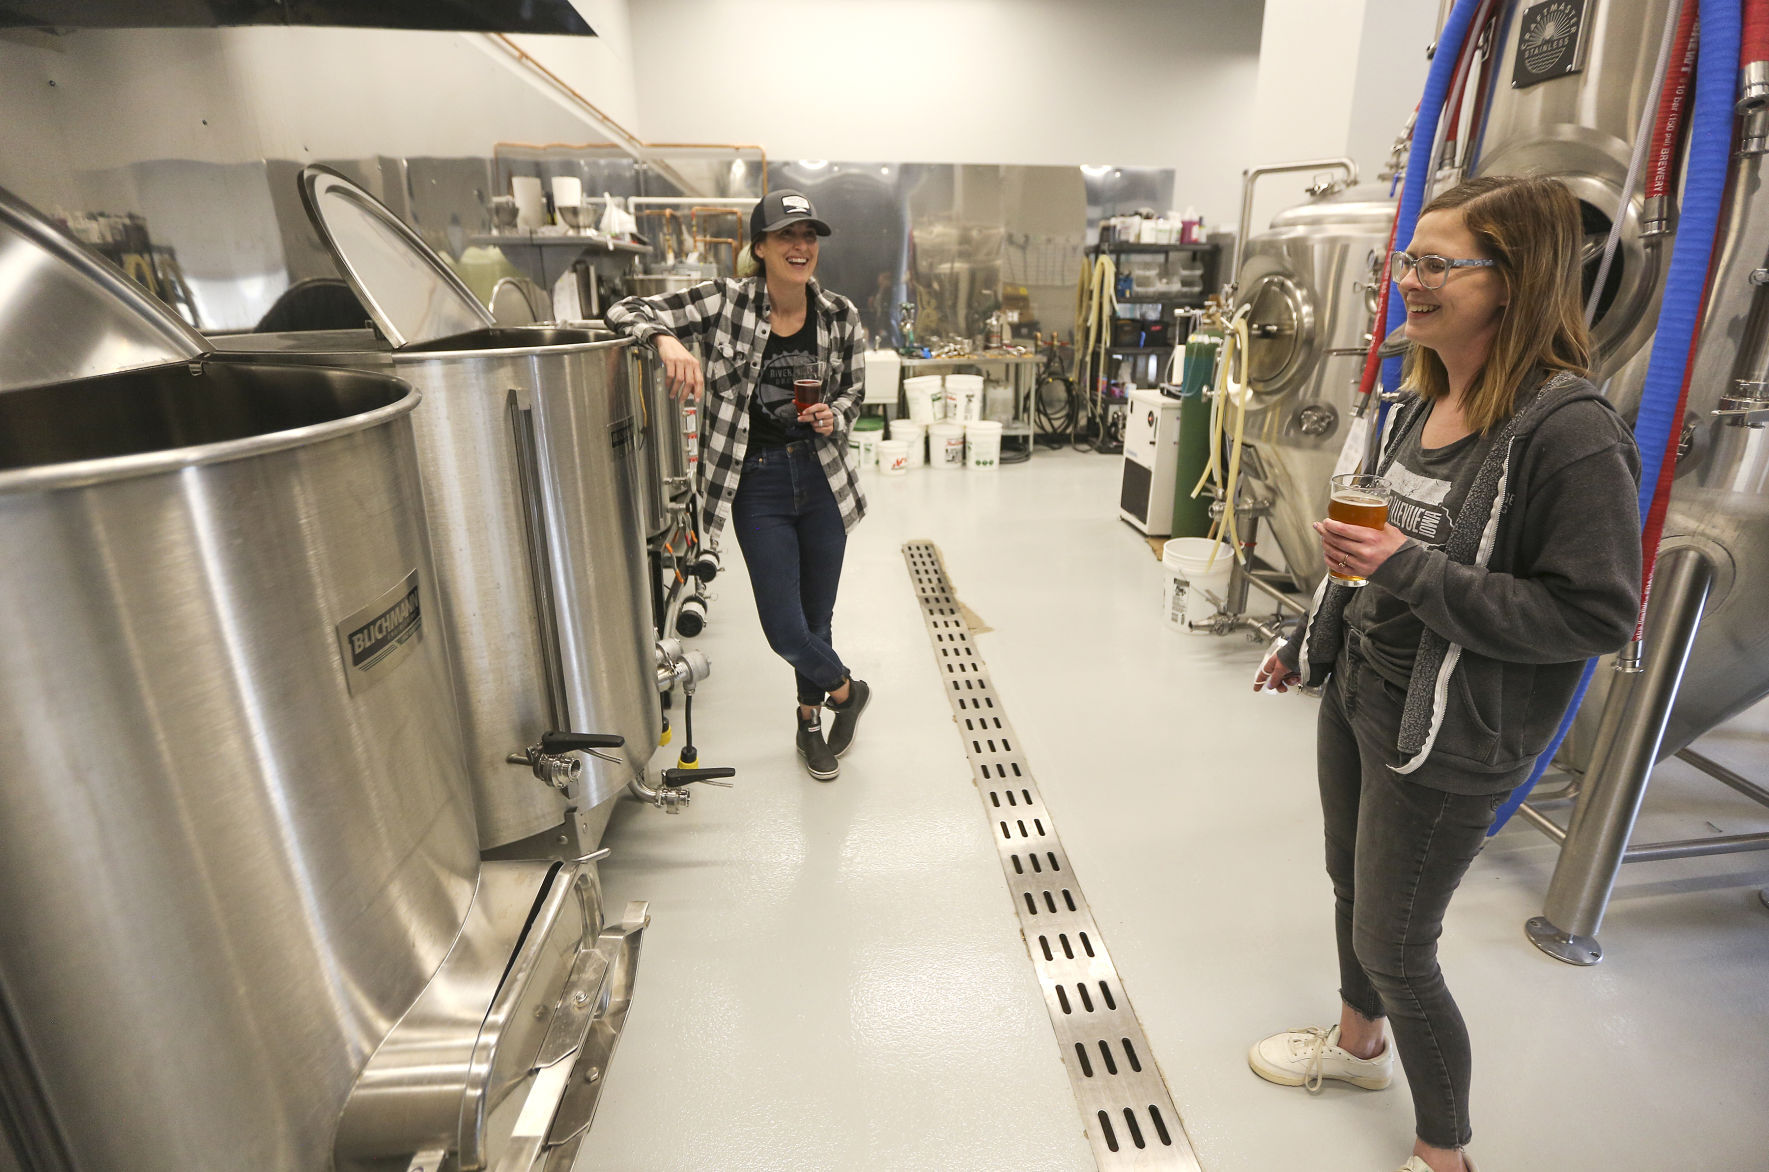 Co-owners of River Ridge Brewing, Kelly Hueneke (left) and Allison Simpson, chat in their brewing area of their new business located in Bellevue, Iowa. PHOTO CREDIT: Dave Kettering